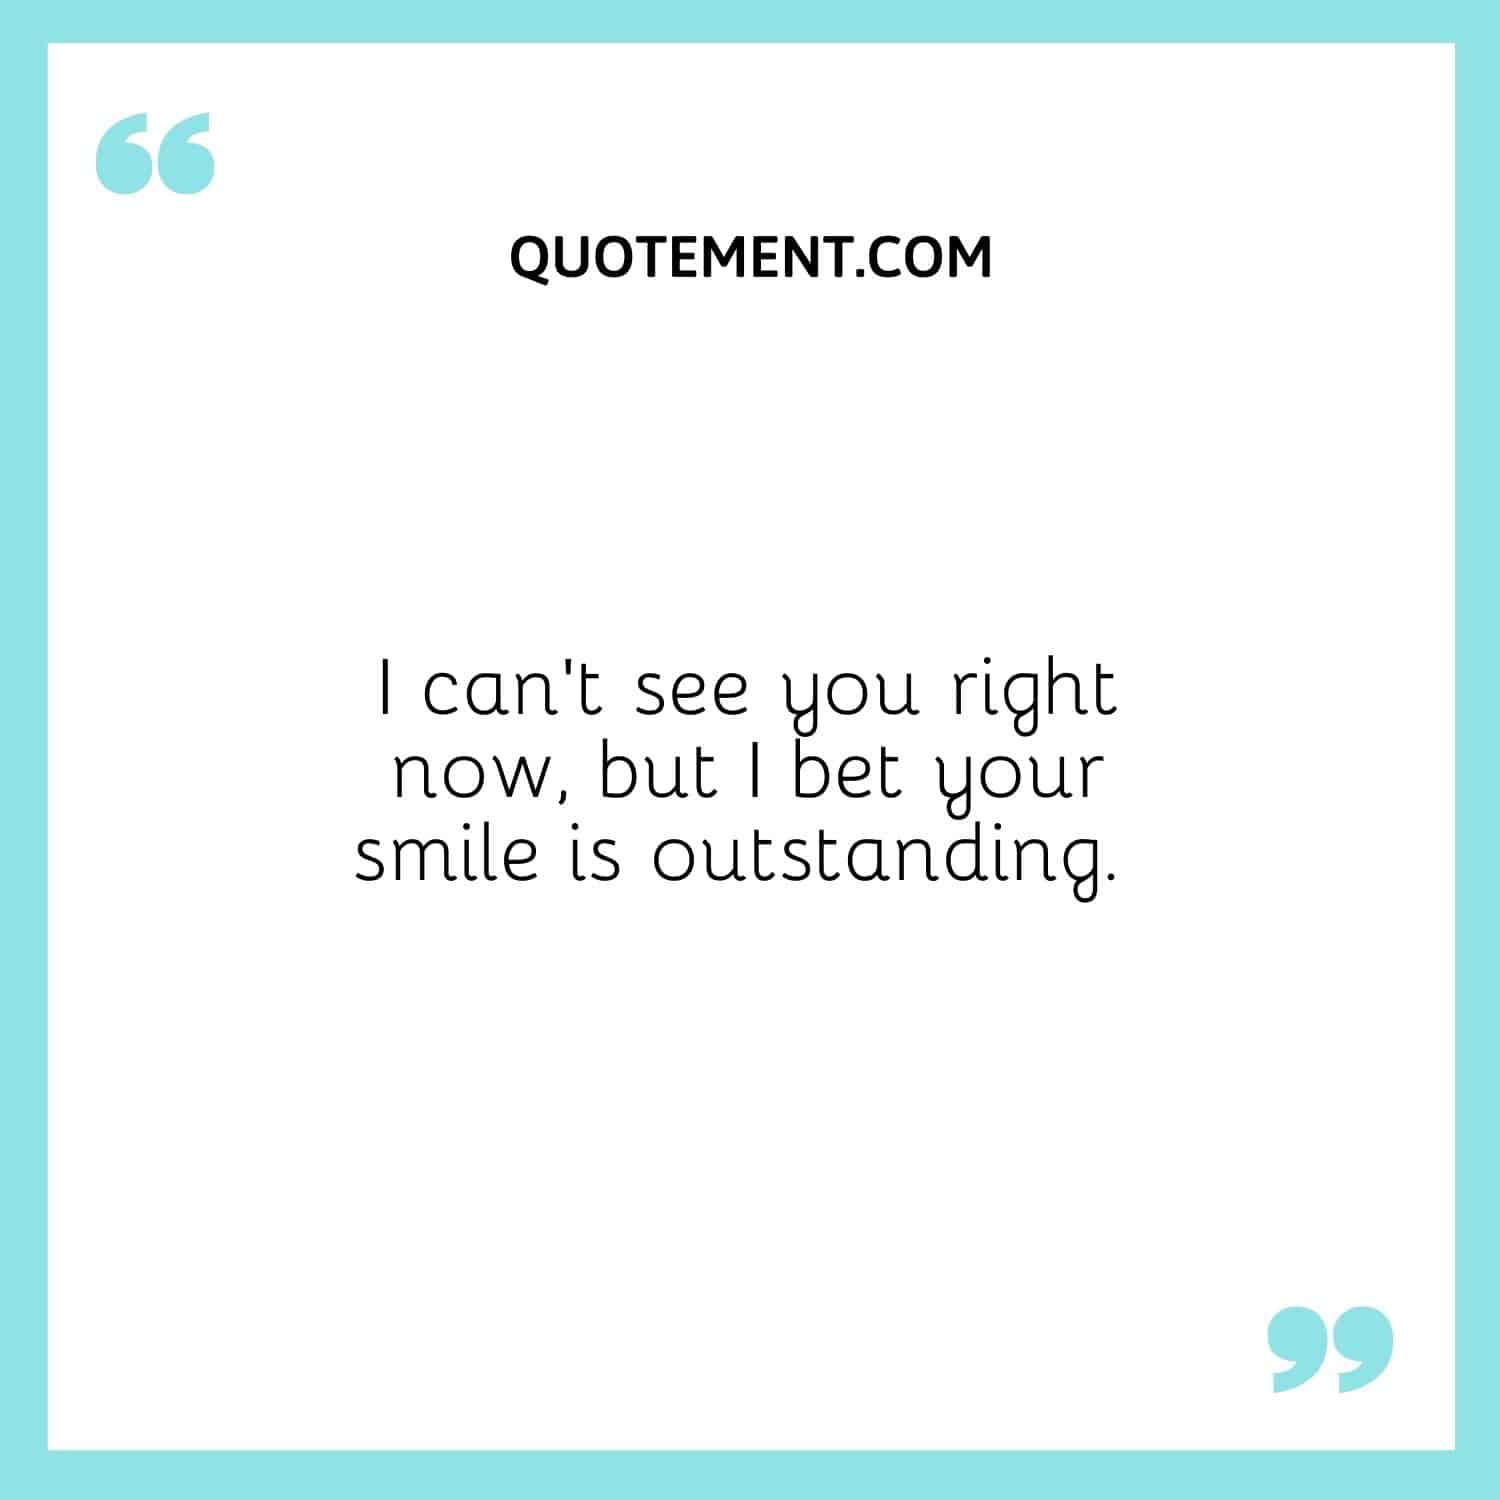 I bet your smile is outstanding